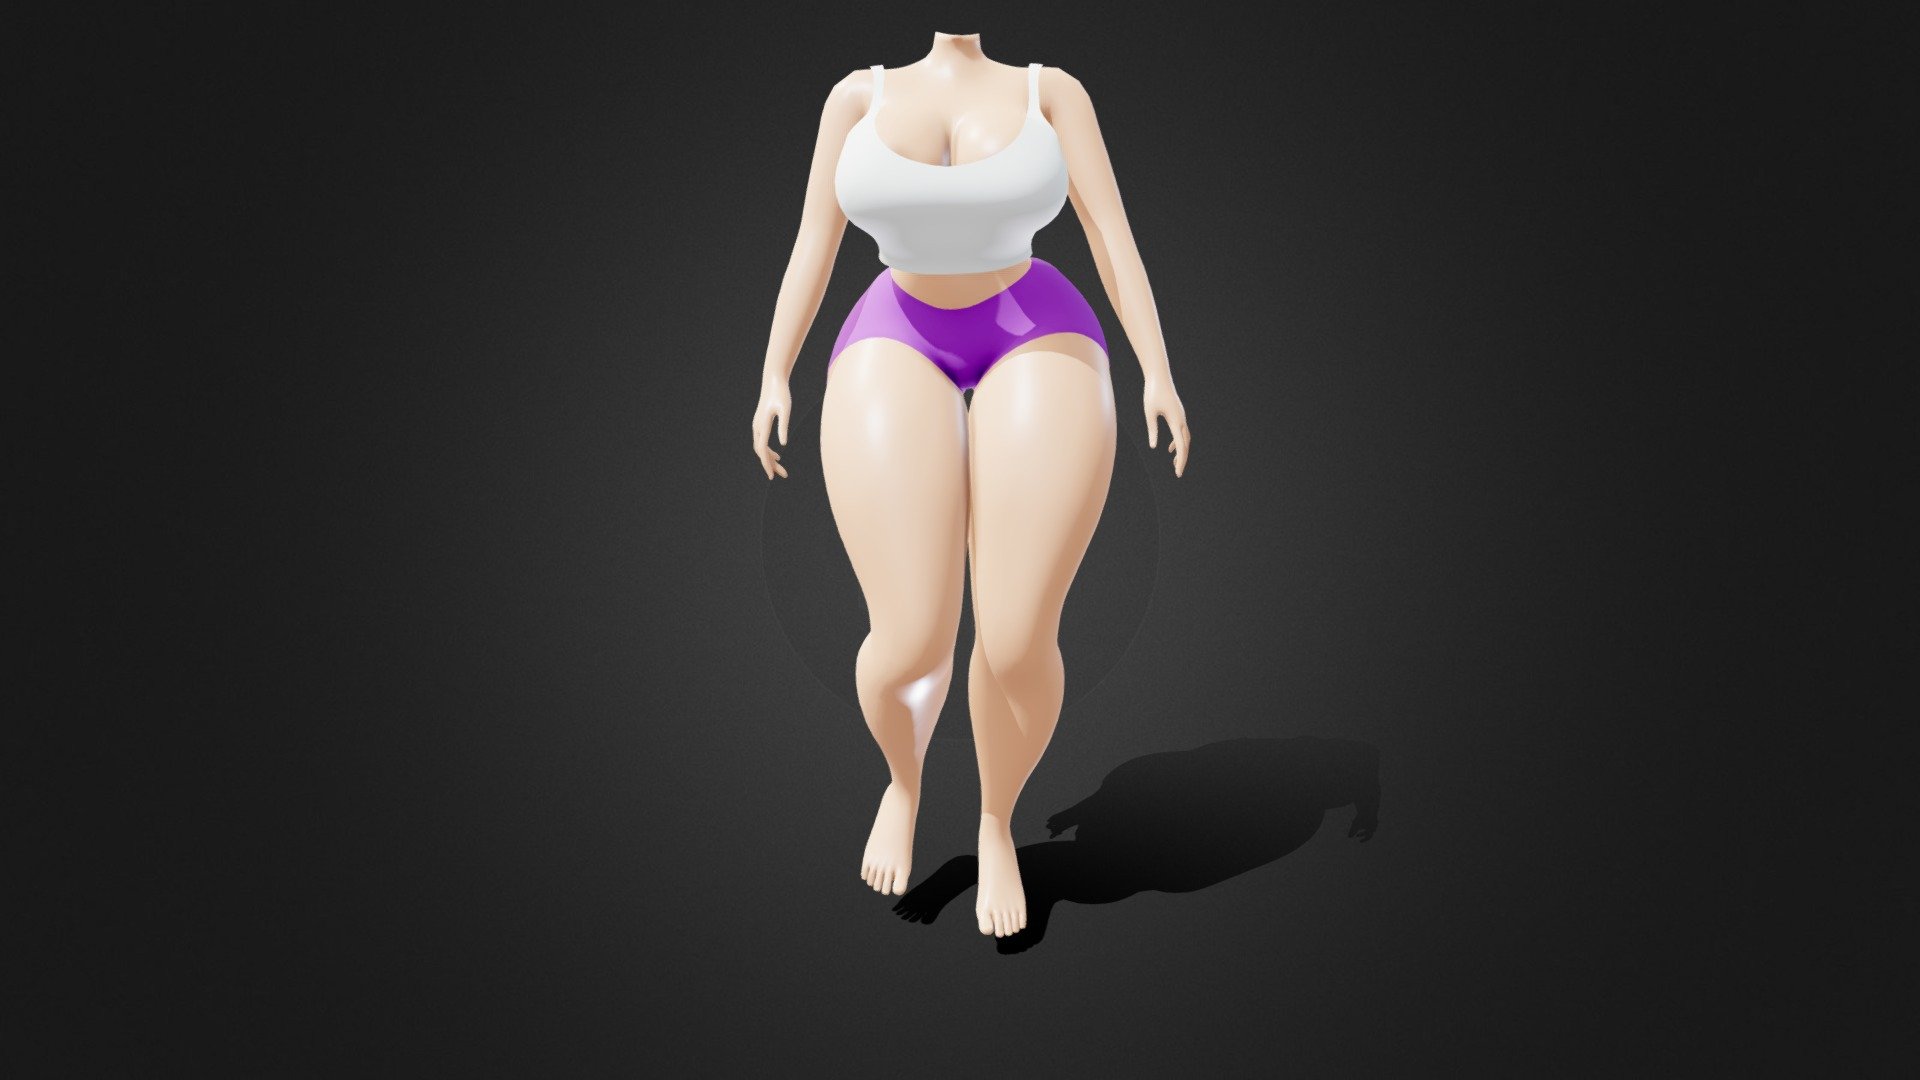 Model now has a UV map. 

The new and improved female body. A much better form and shape overall. The hips, the thighs, and curves, oh my! Very, very nice. I might use this as my base for my future models. Let me know what you think 3d model